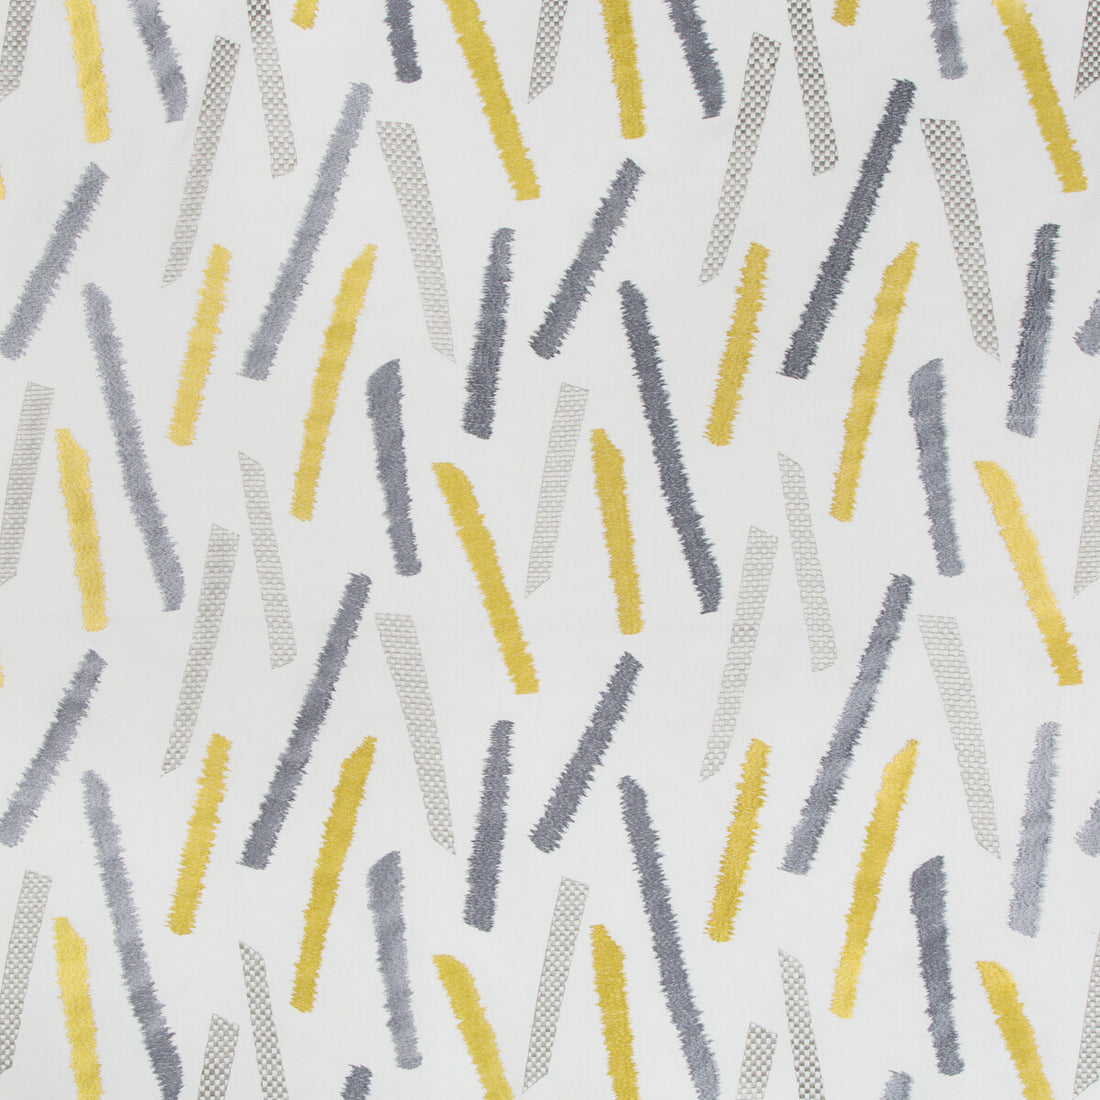 Tramonto fabric in citrine color - pattern 35020.411.0 - by Kravet Basics in the Jeffrey Alan Marks Oceanview collection